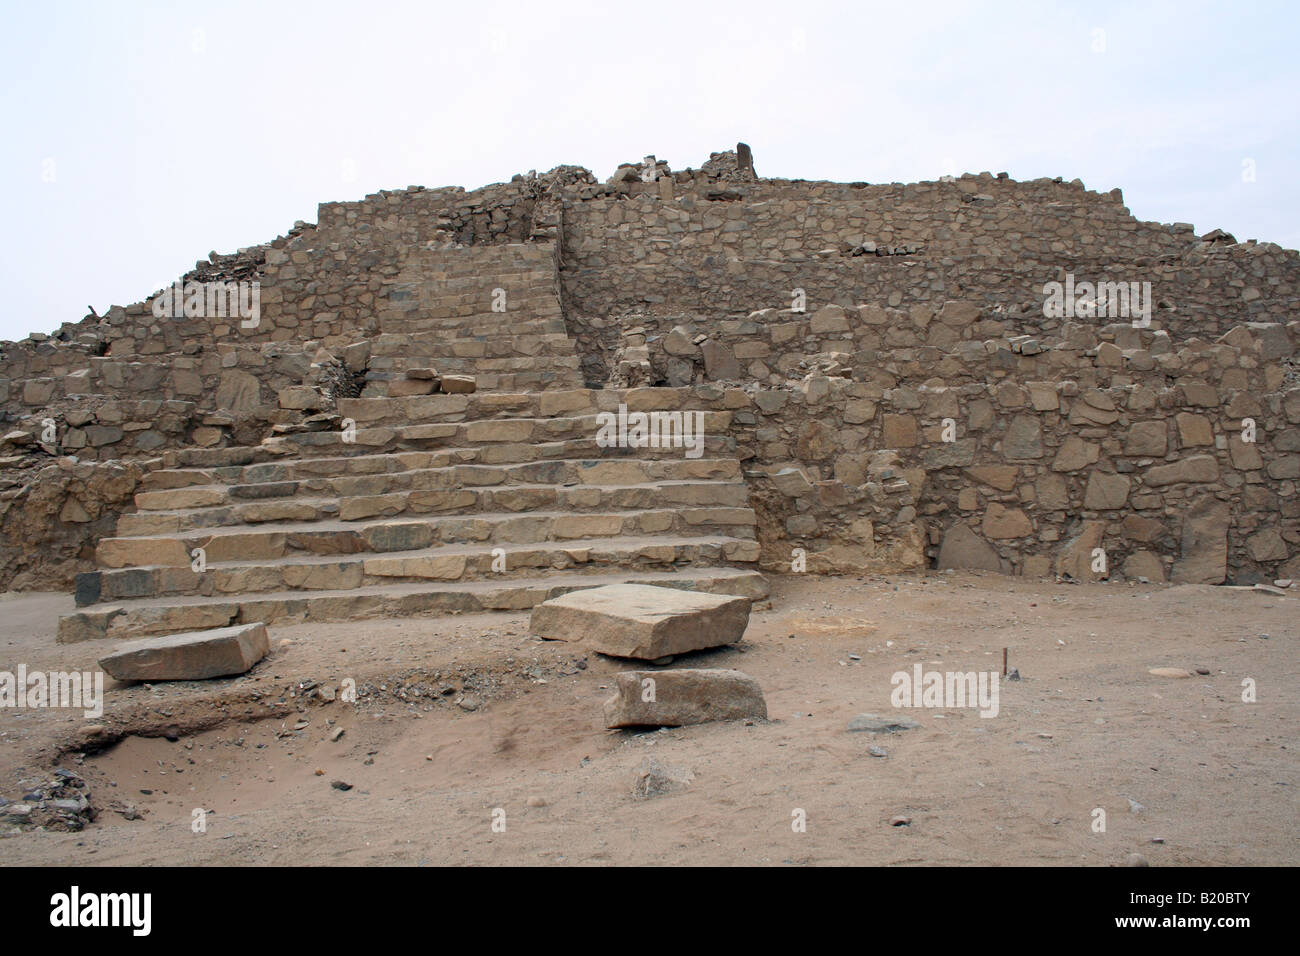 The the Pyramid of La Huanca at the Caral archeological site near Barranca, Peru north of Lima. Stock Photo